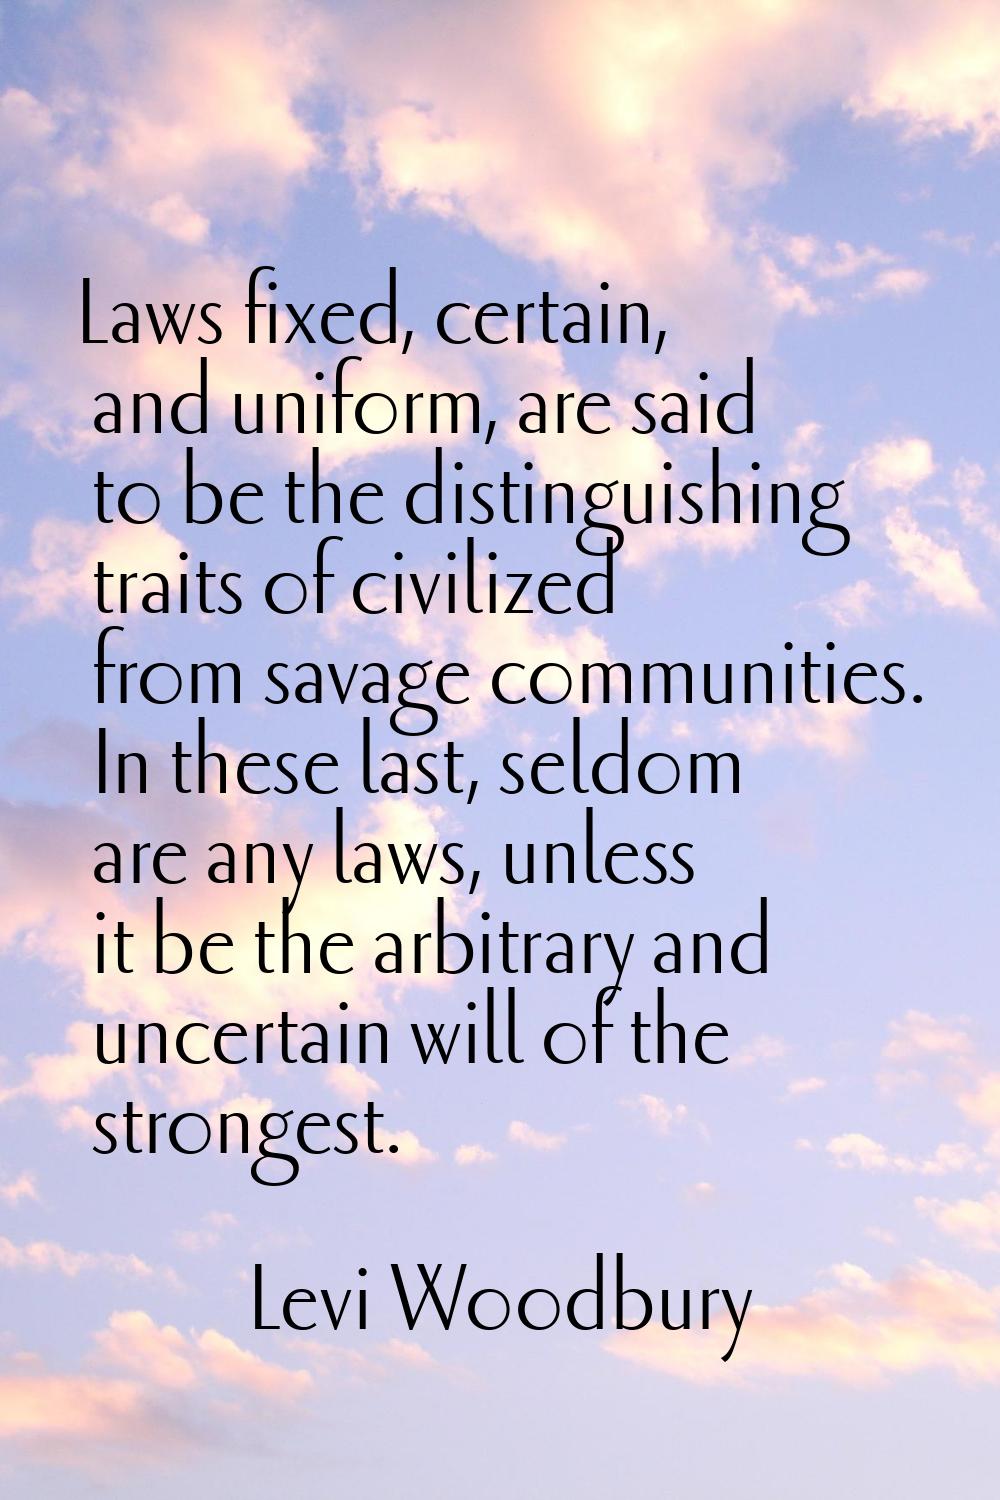 Laws fixed, certain, and uniform, are said to be the distinguishing traits of civilized from savage